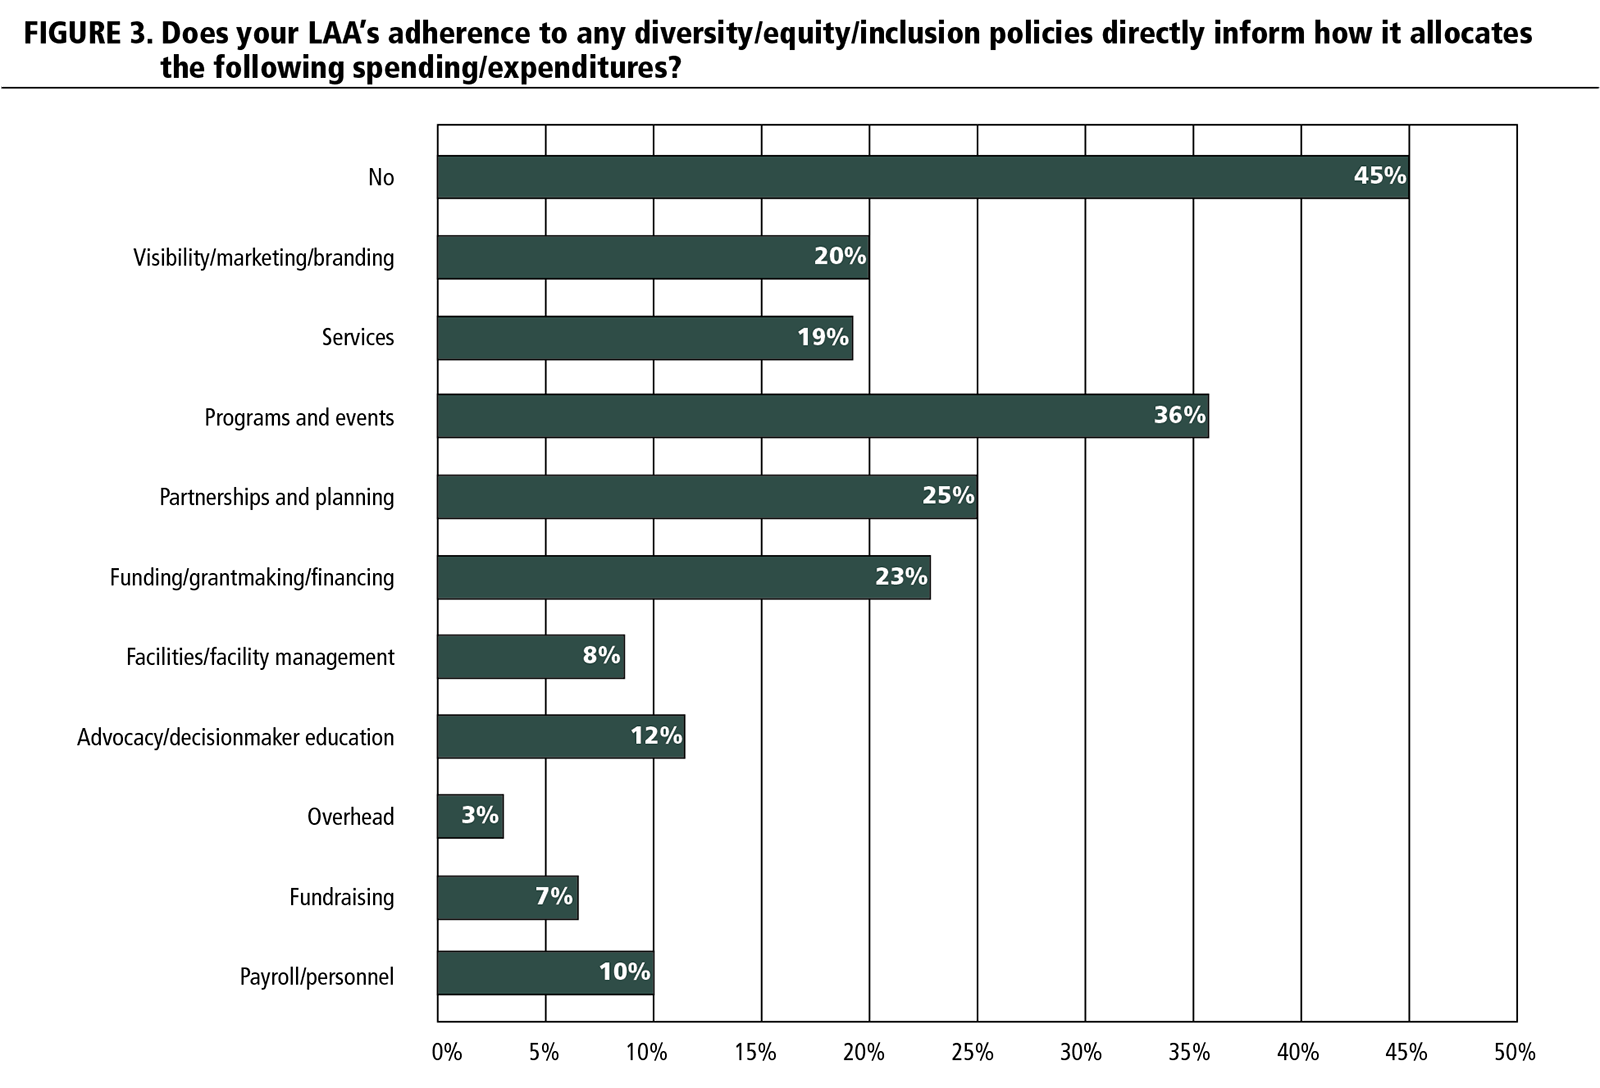 FIGURE 3. Does your LAA's adherence to any diversity/equity/inclusion policies directly inform how it allocates the following spending/expenditures?